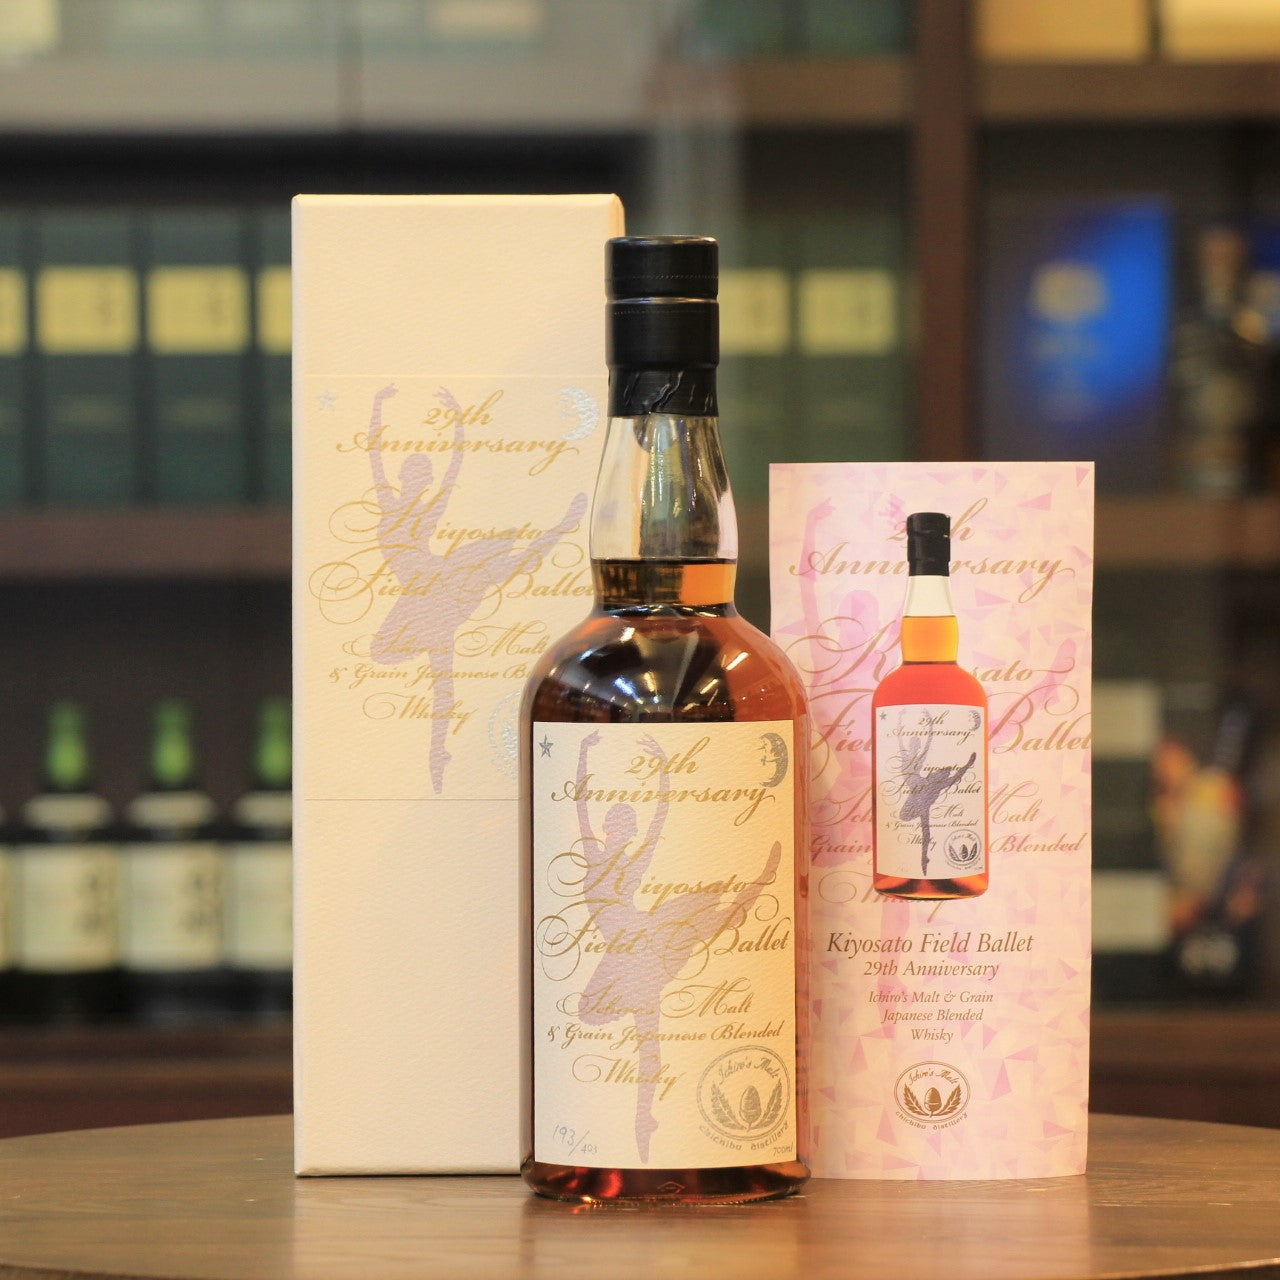 This rare whisky is a fantastic vatting by Mr. Ichiro Akuto, from two single casks from two lost distilleries, a Hanyu 1990 vintage and a Kawasaki 1982 vintage. This is a special bottling to celebrate the 29th Anniversary of the Kiyosato Field Ballet.